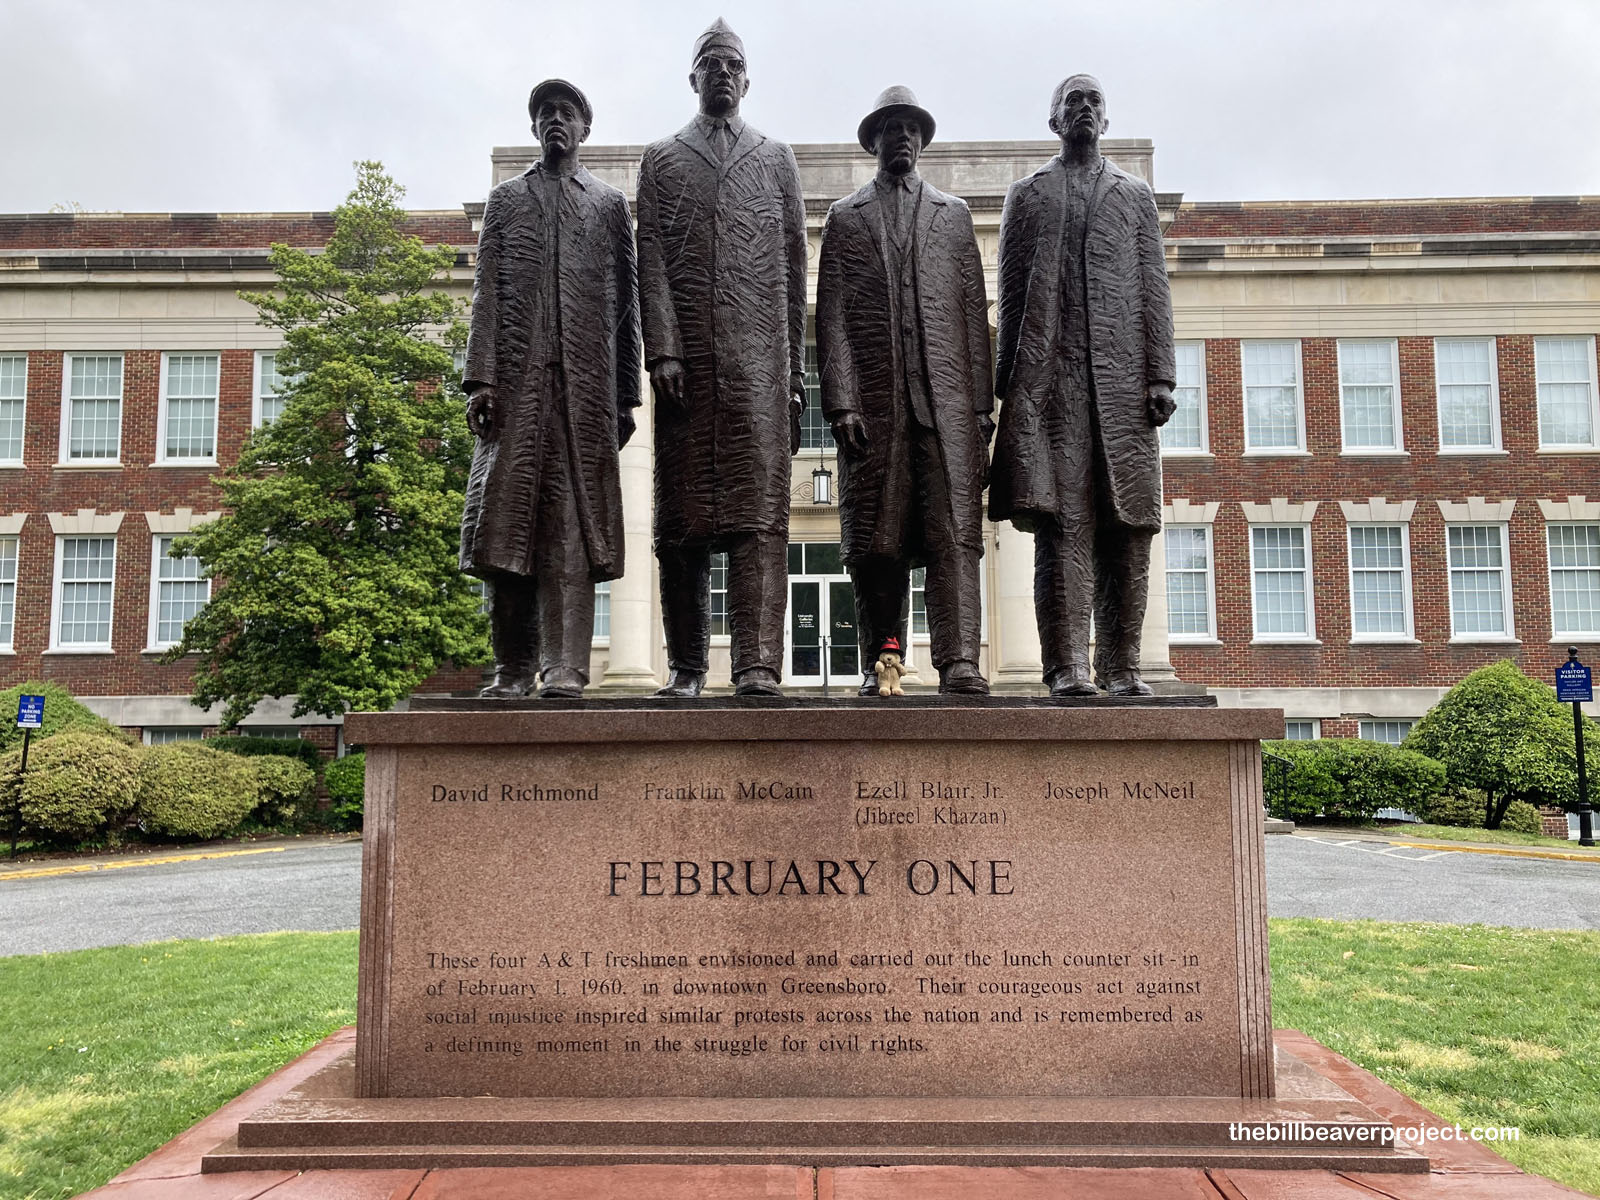 The February One Monumentand the Greensboro Four!